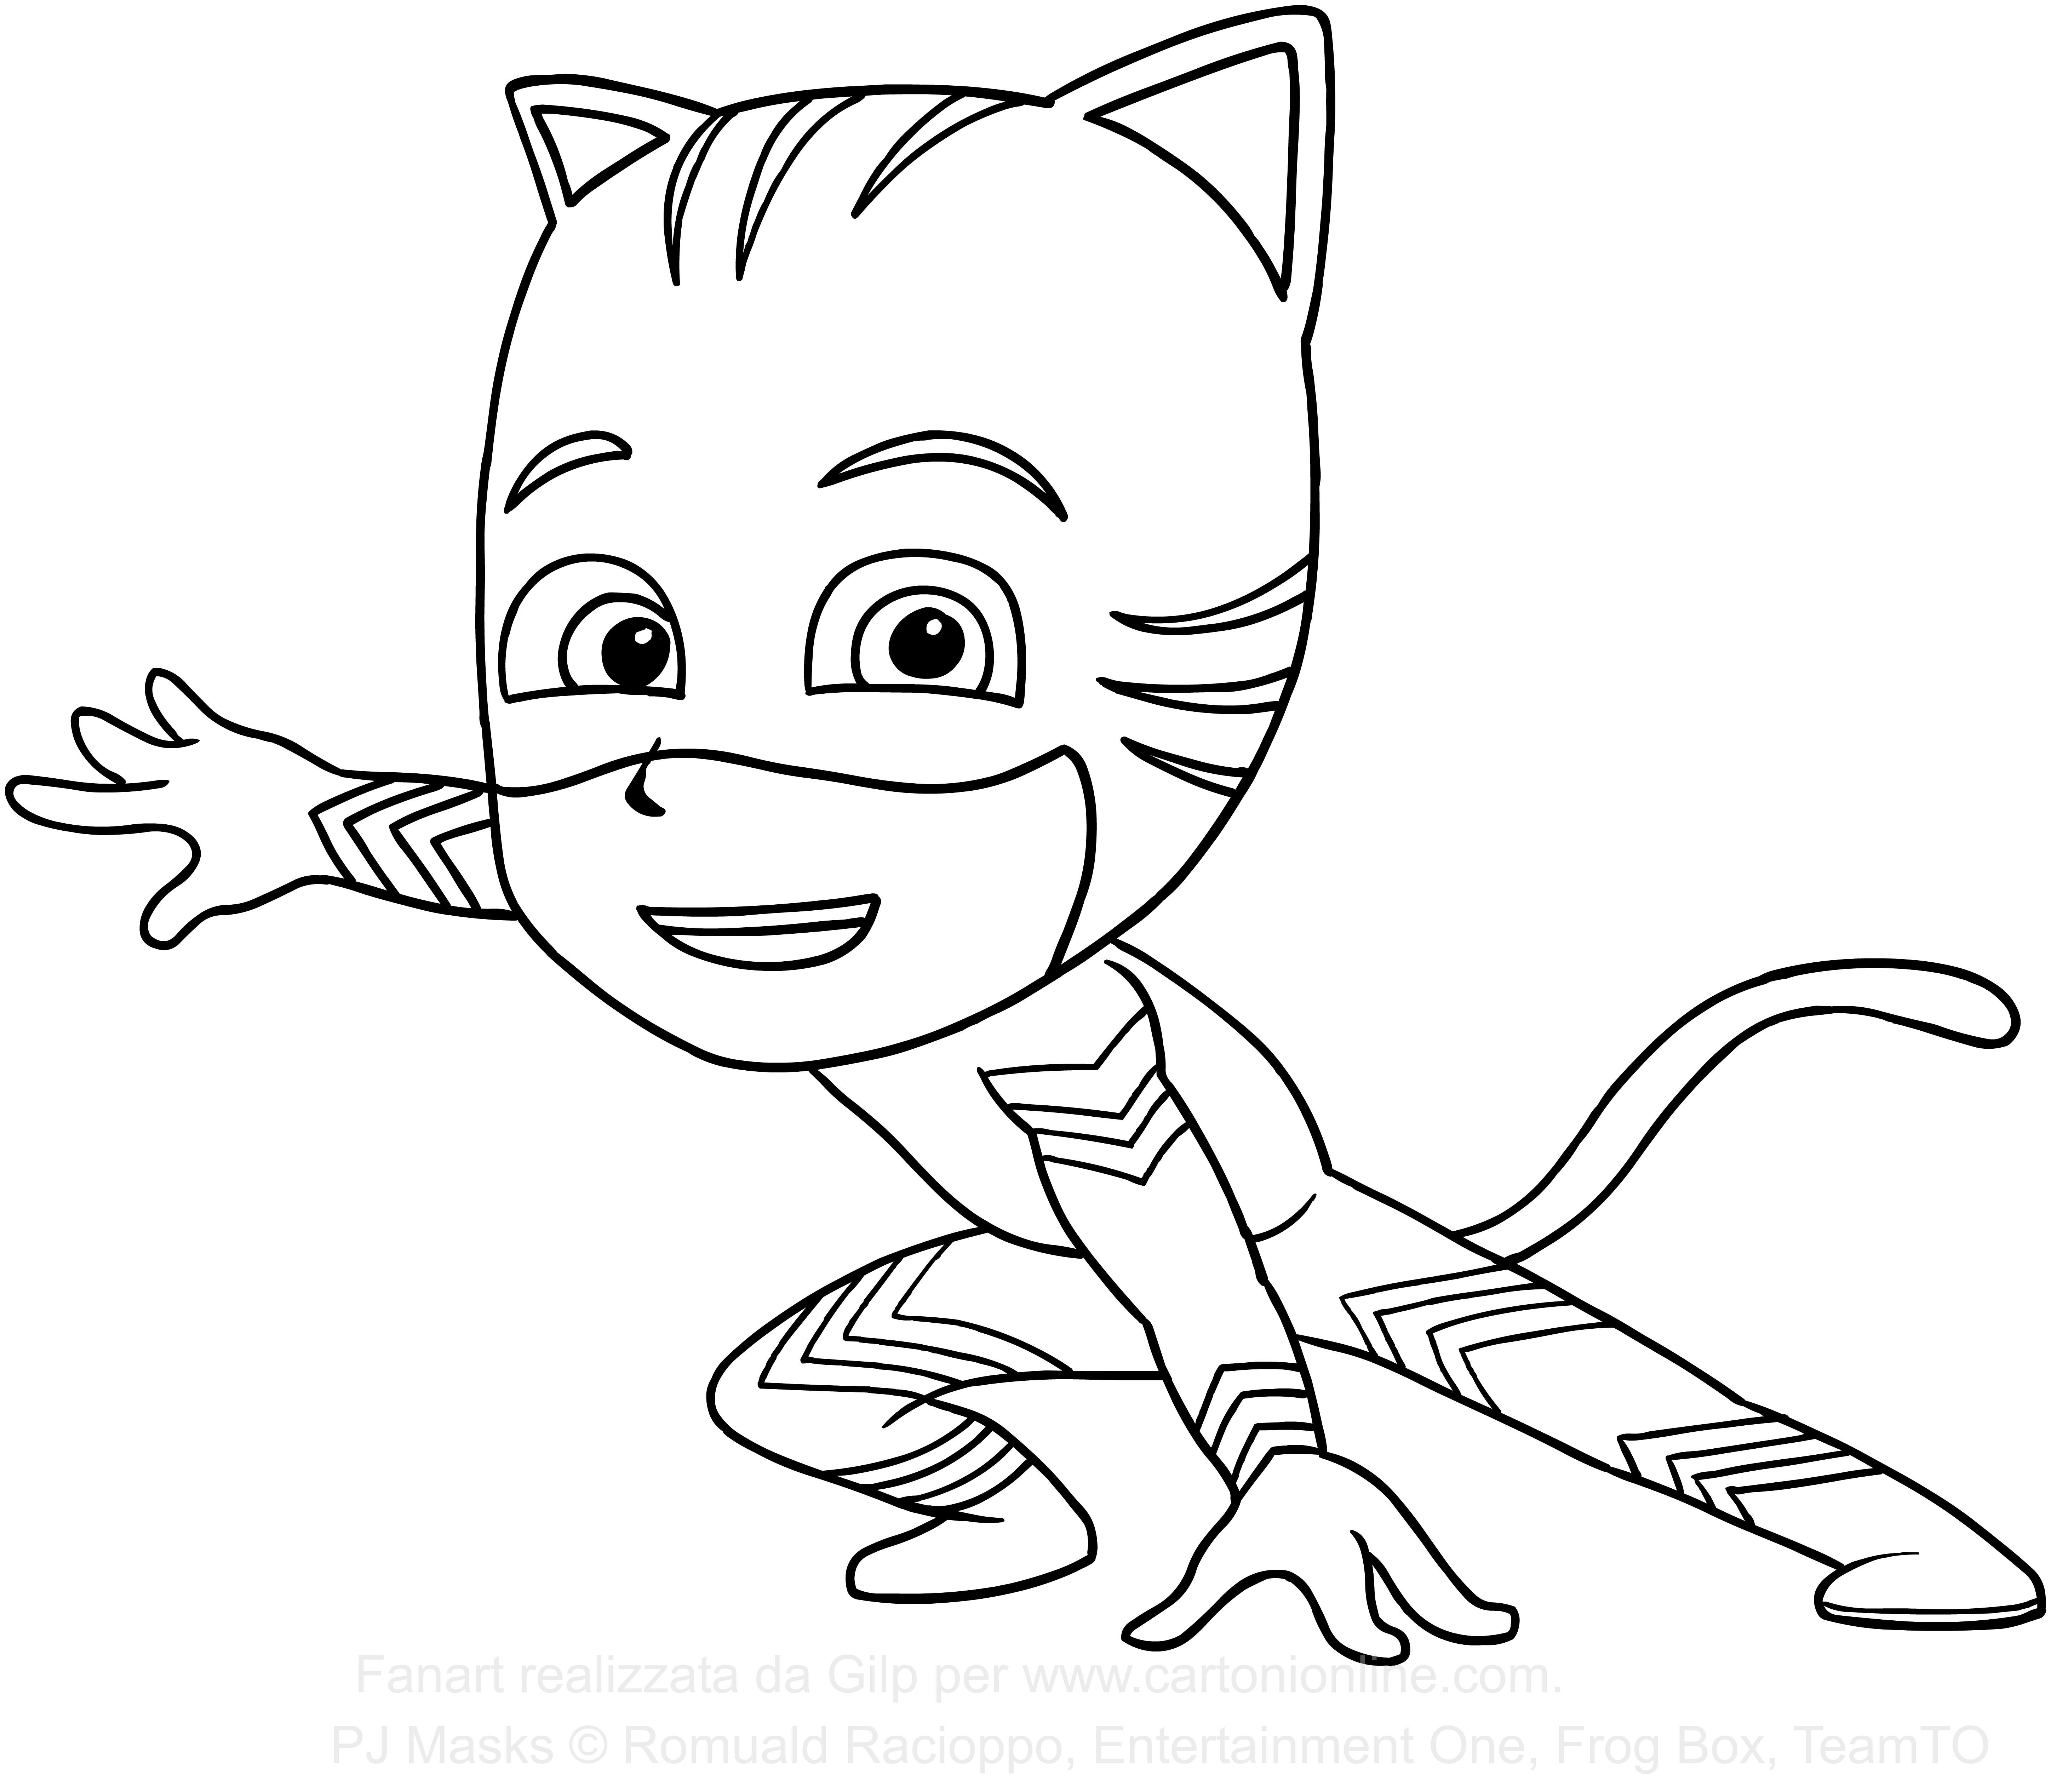 Pj Masks Catboy Coloring Pages   Coloring Home